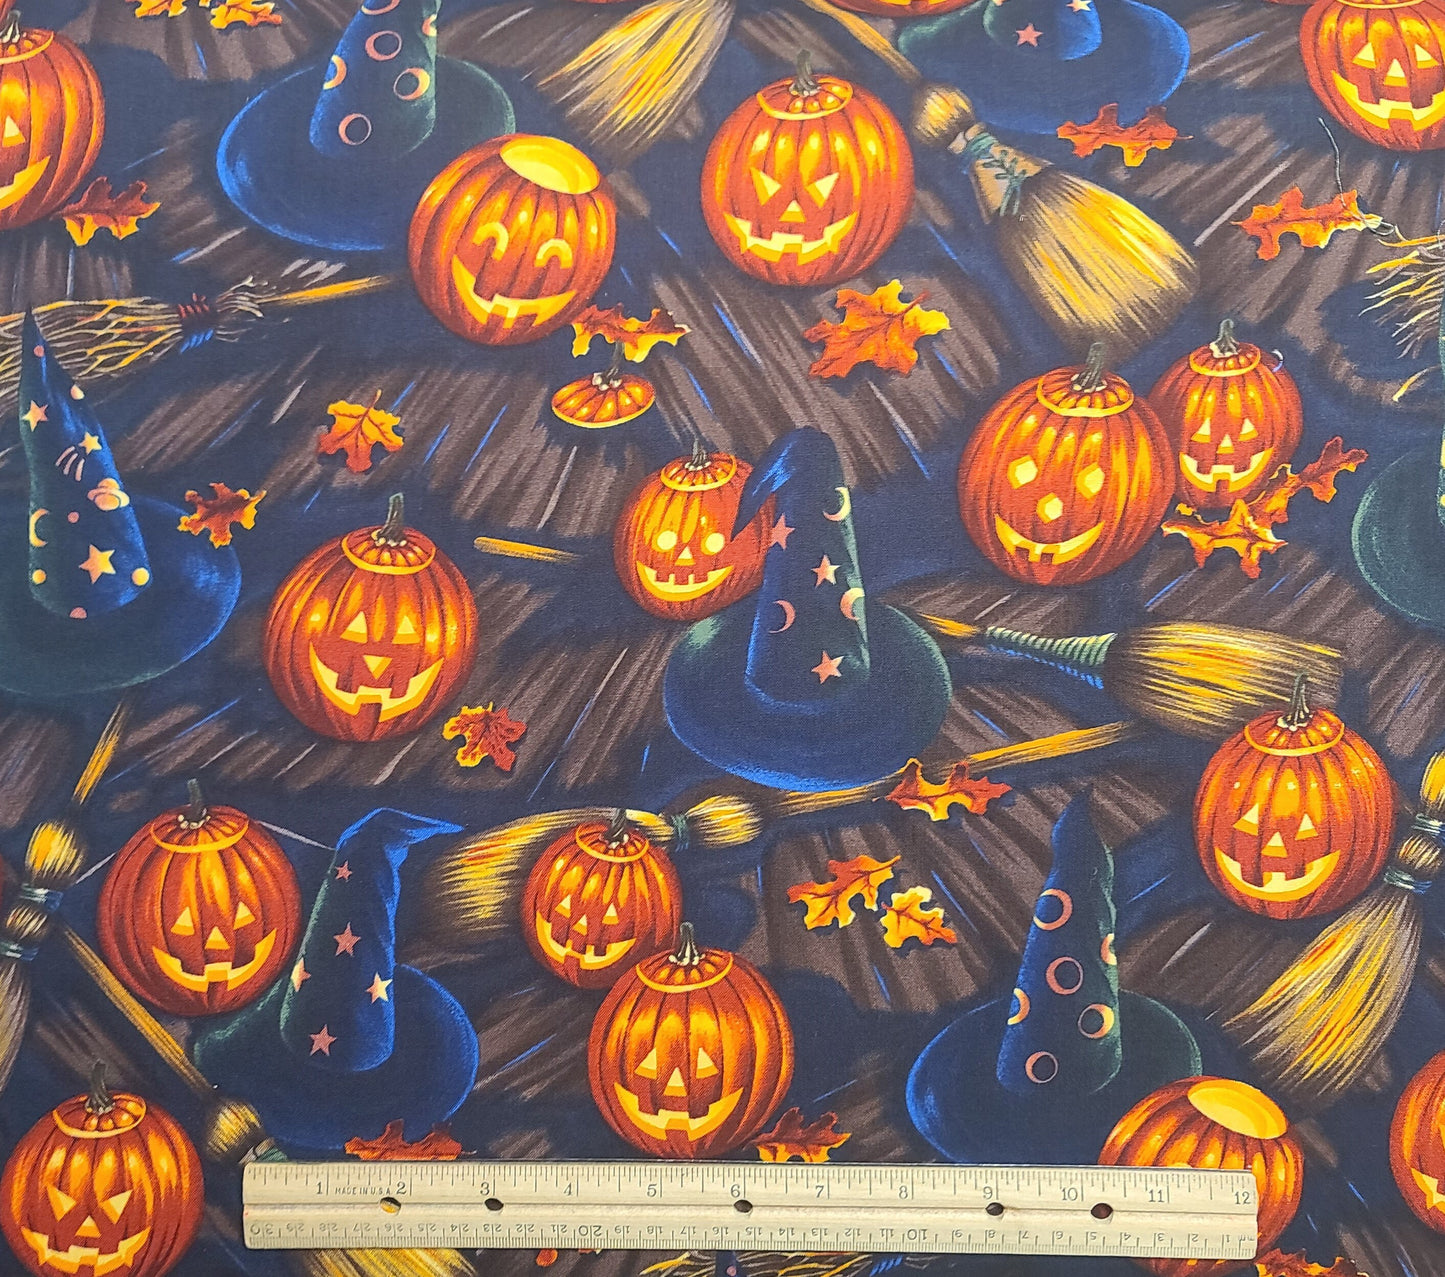 EOB - Bell Knobs & Broomsticks The Alexander Henry Fabric Collection 1998 - Jack-O-Lantern, Broom, Witch Hat Print Fabric